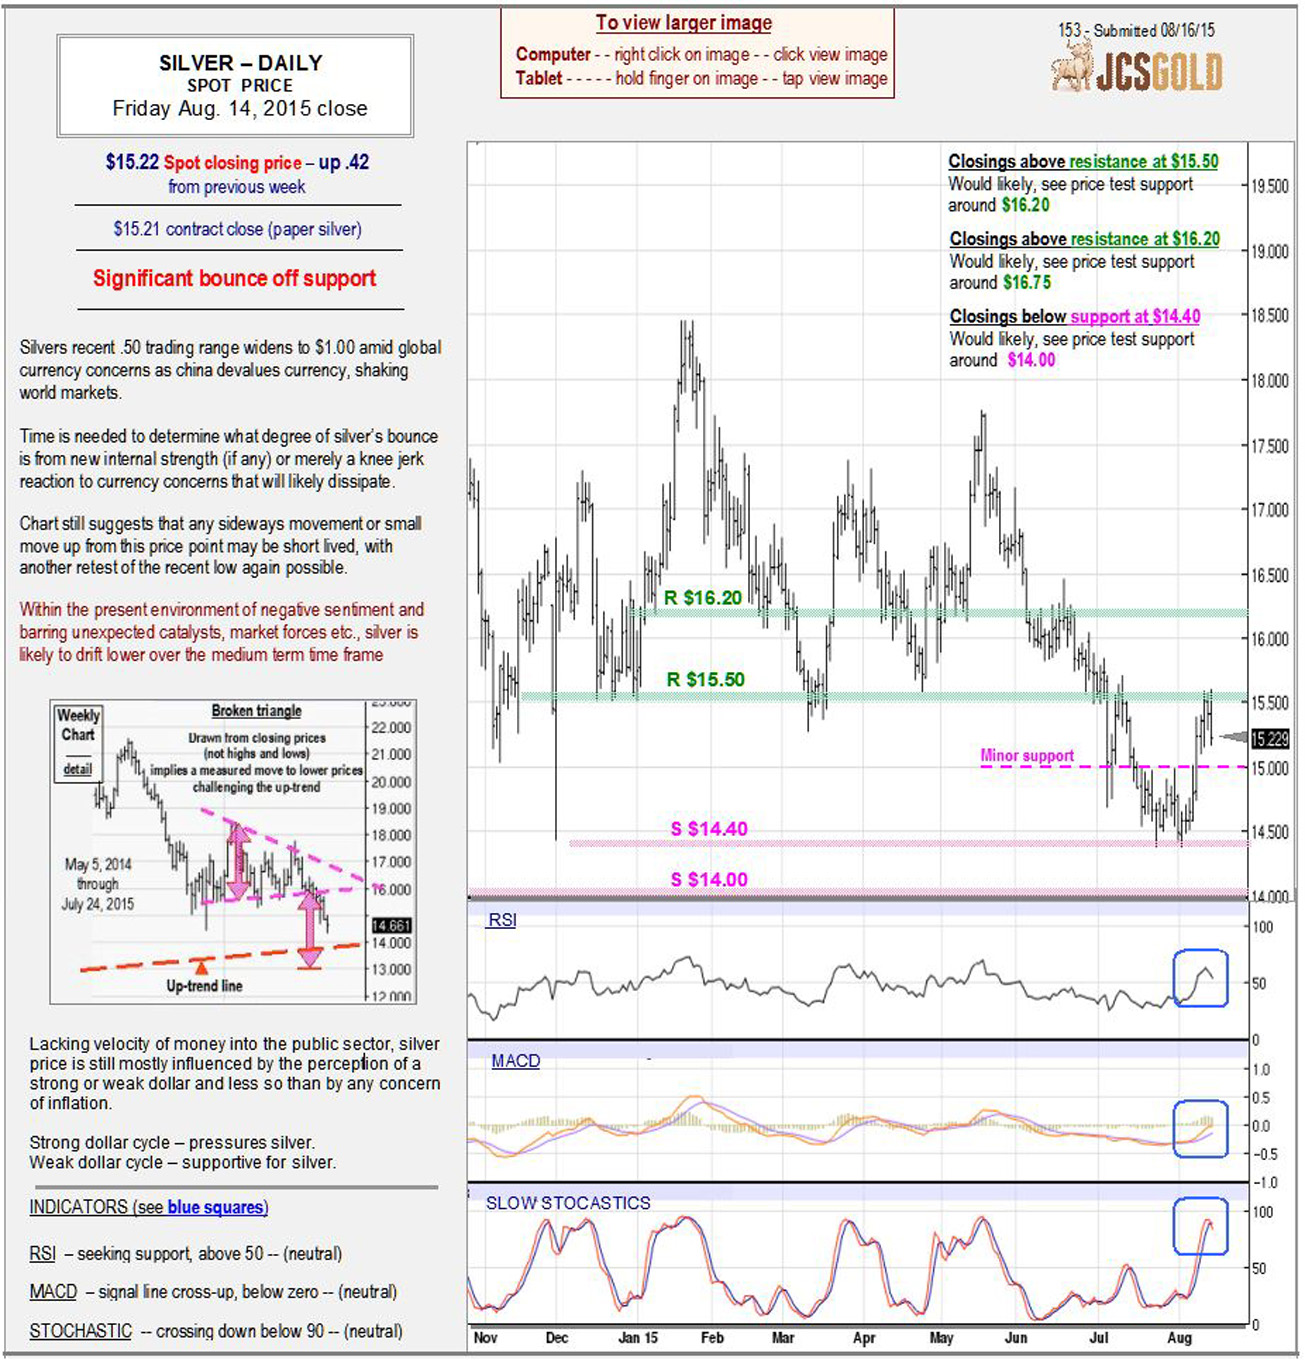 Aug 14, 2015 chart & commentary